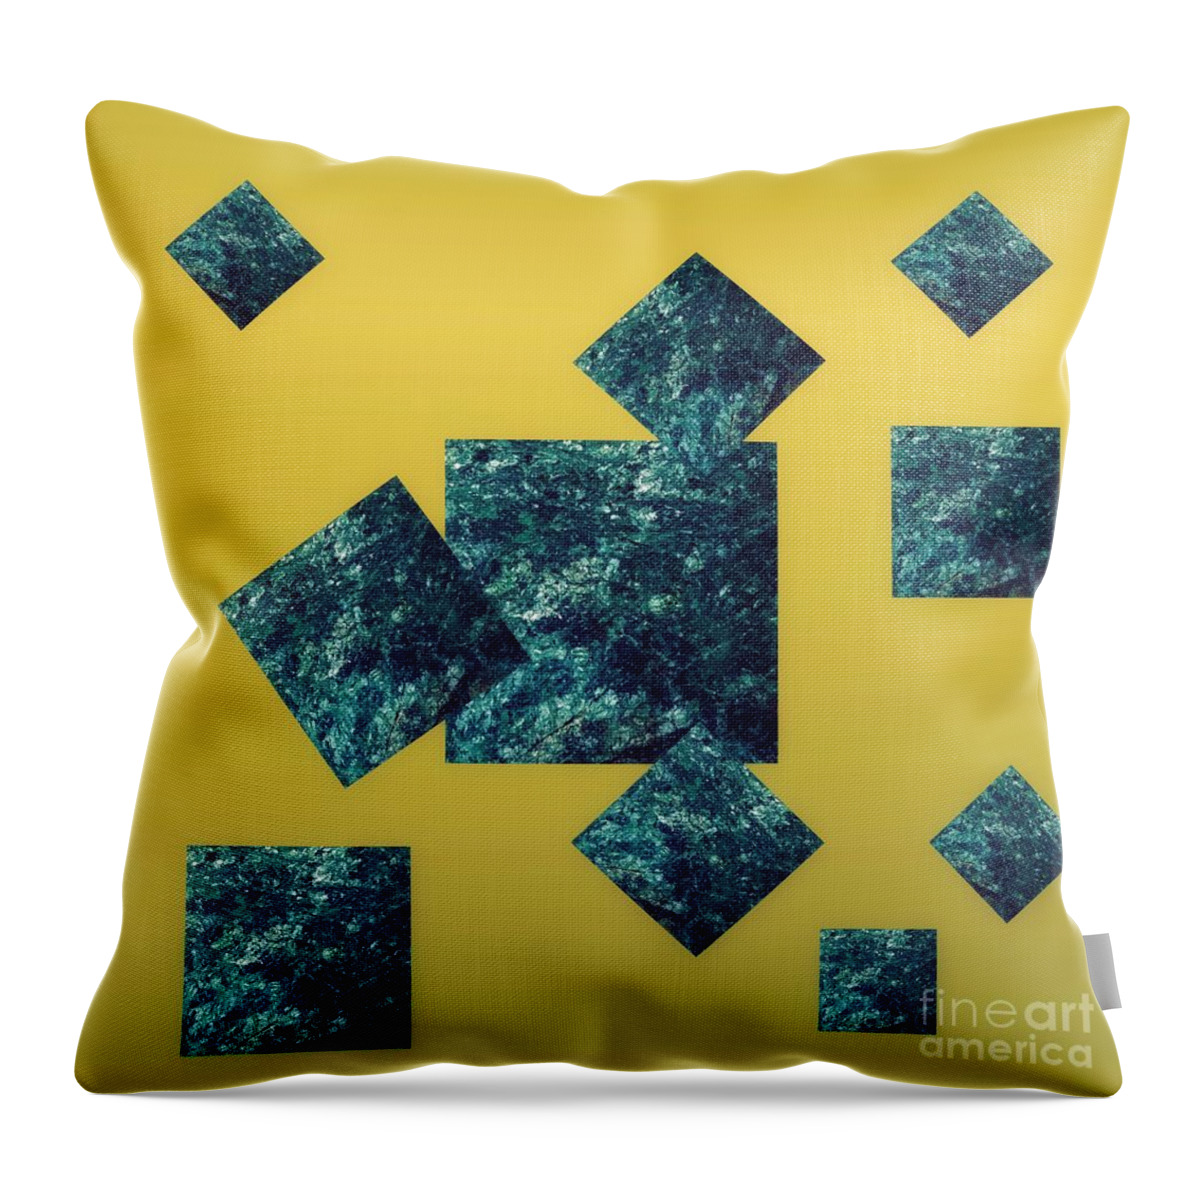 Fuchsite Throw Pillow featuring the mixed media Fuchsite Squares On Gold by Rachel Hannah